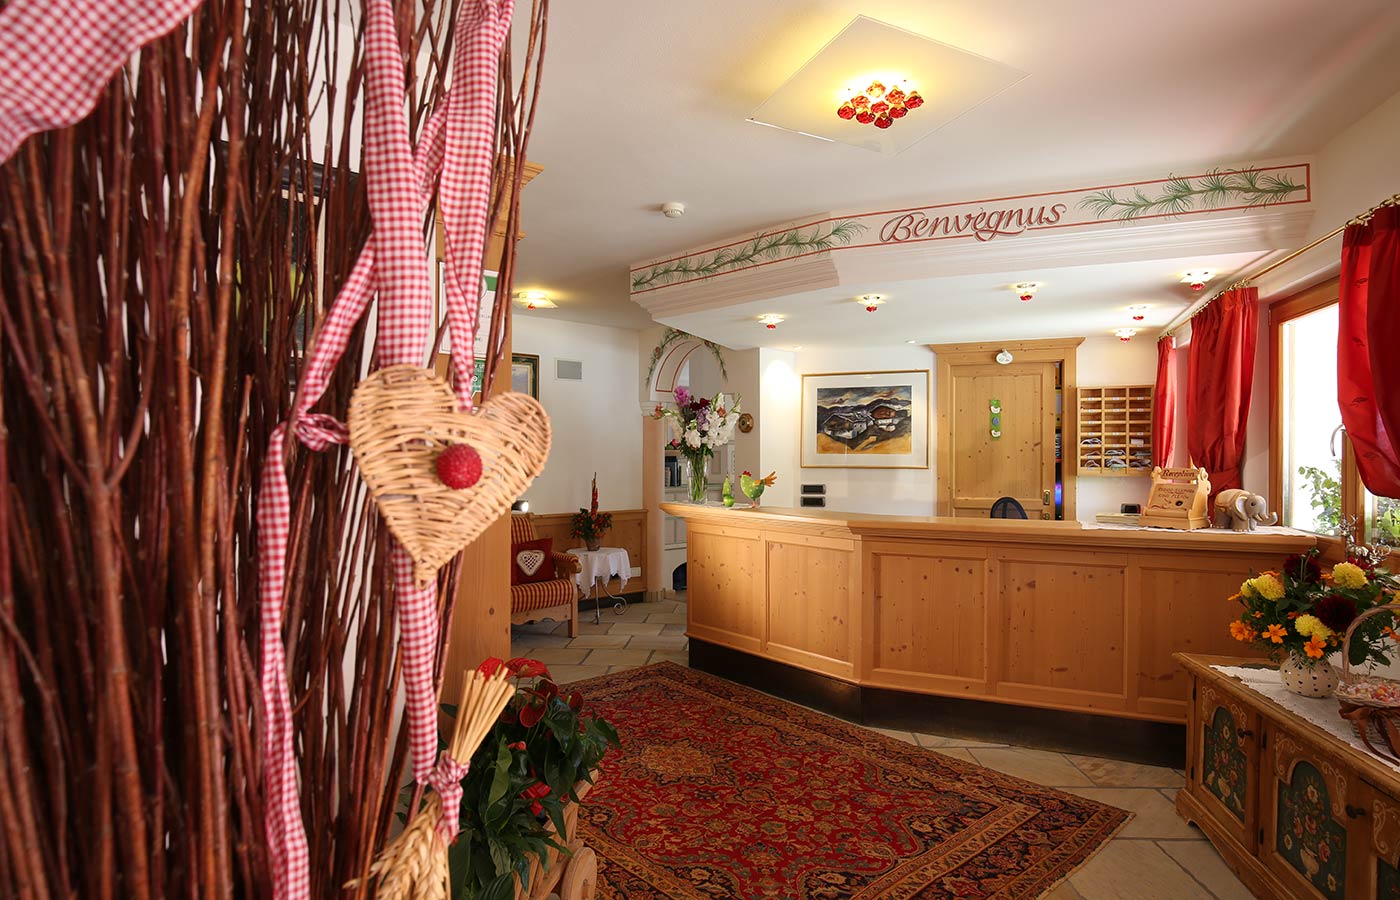 Hotel Mesdìs reception with wood furnishings, flowers on the desk and a carpet on the floor